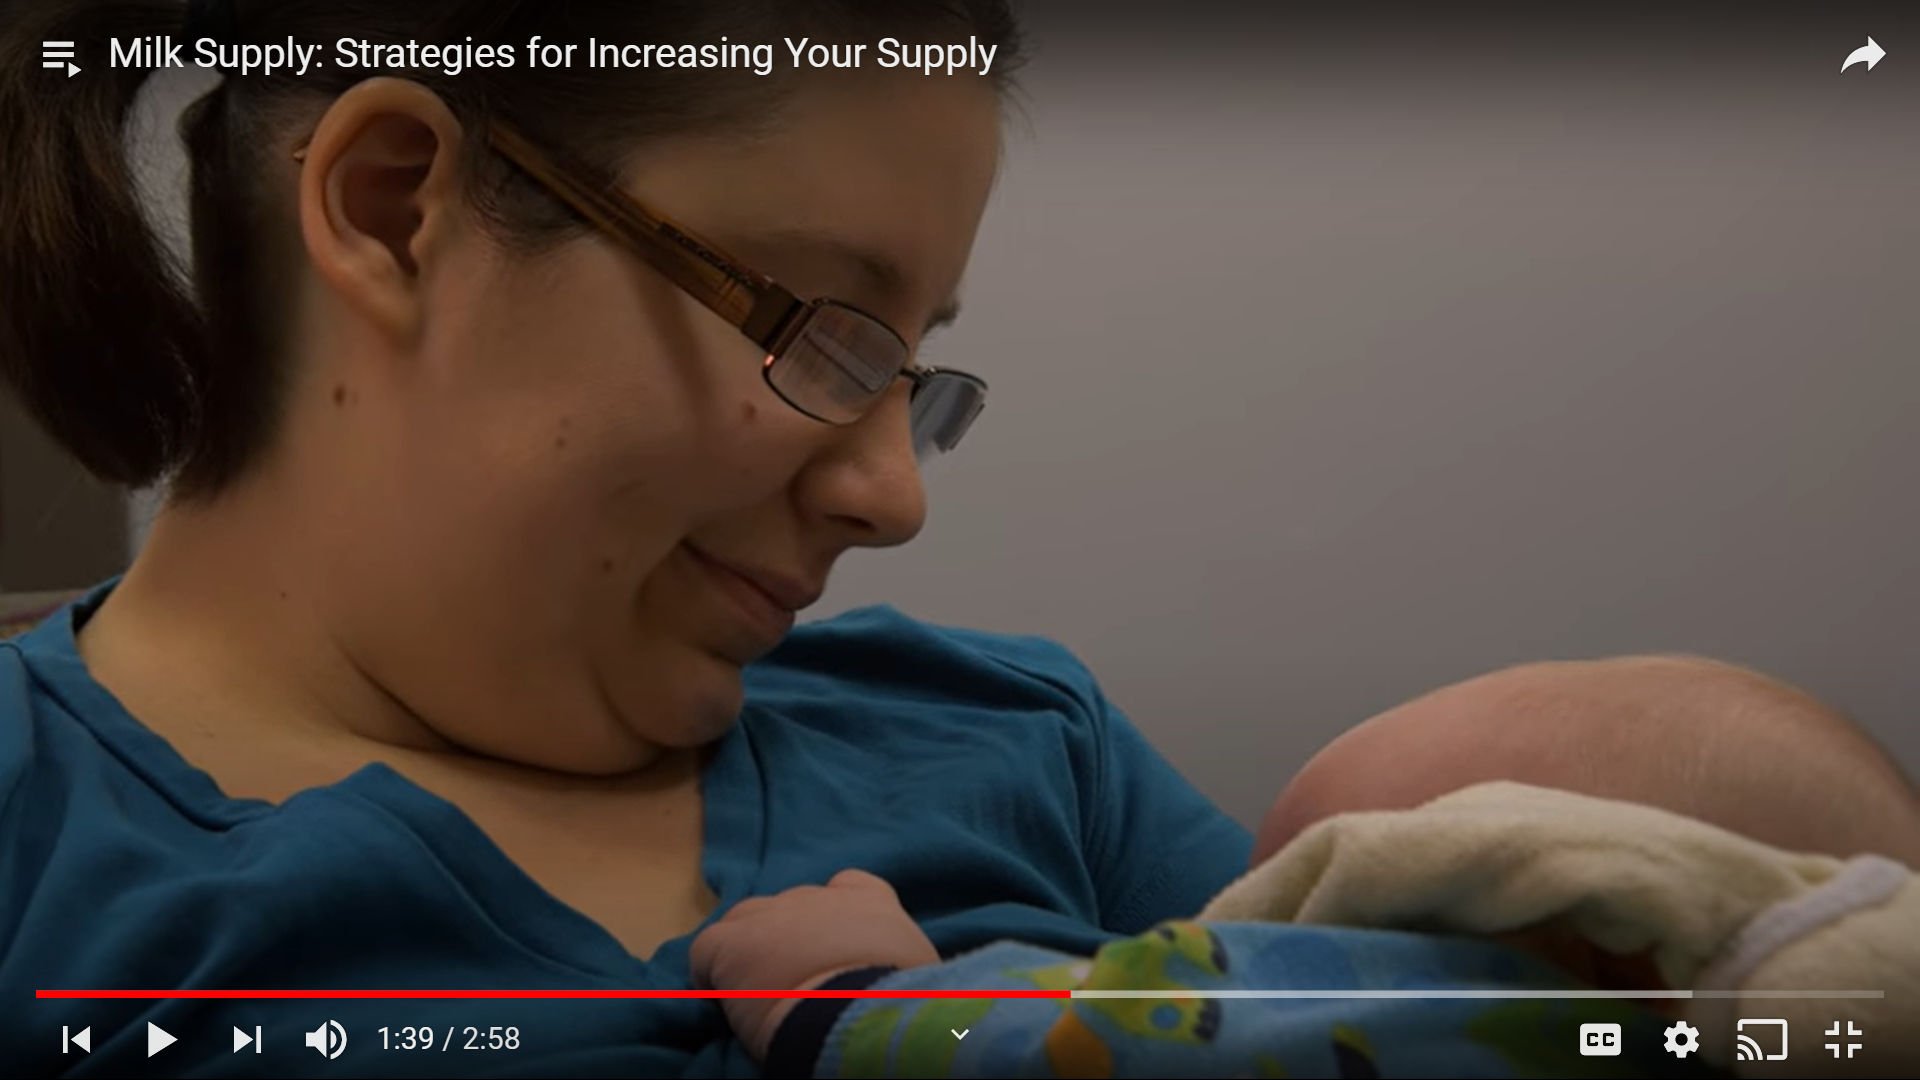 Milk Supply: Strategies for Increasing Your Supply